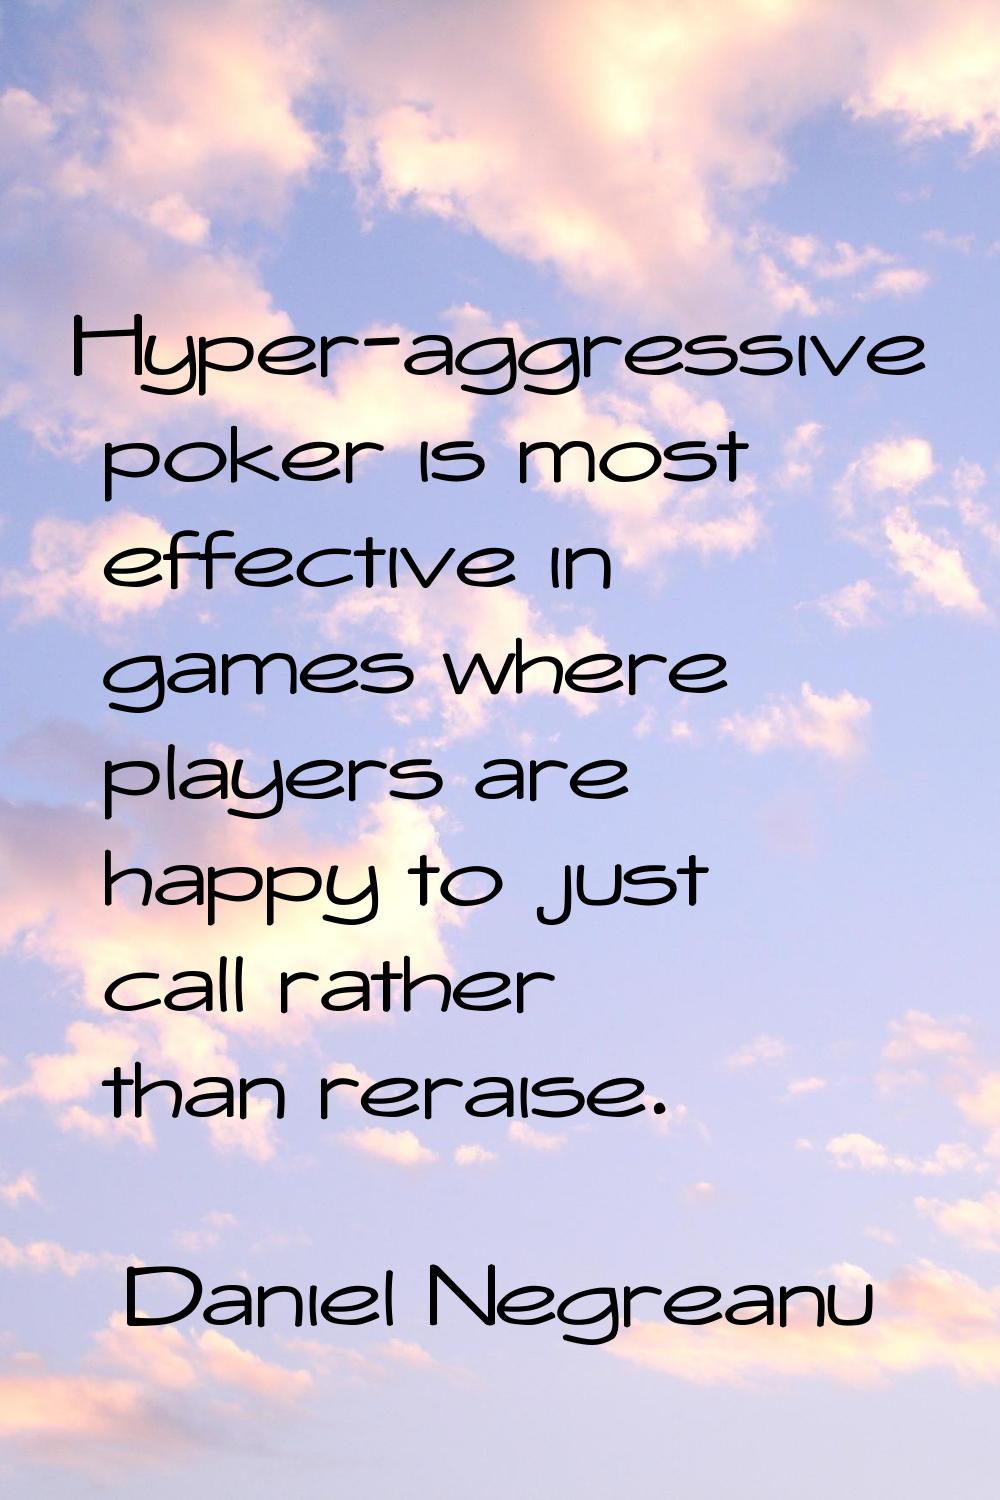 Hyper-aggressive poker is most effective in games where players are happy to just call rather than 